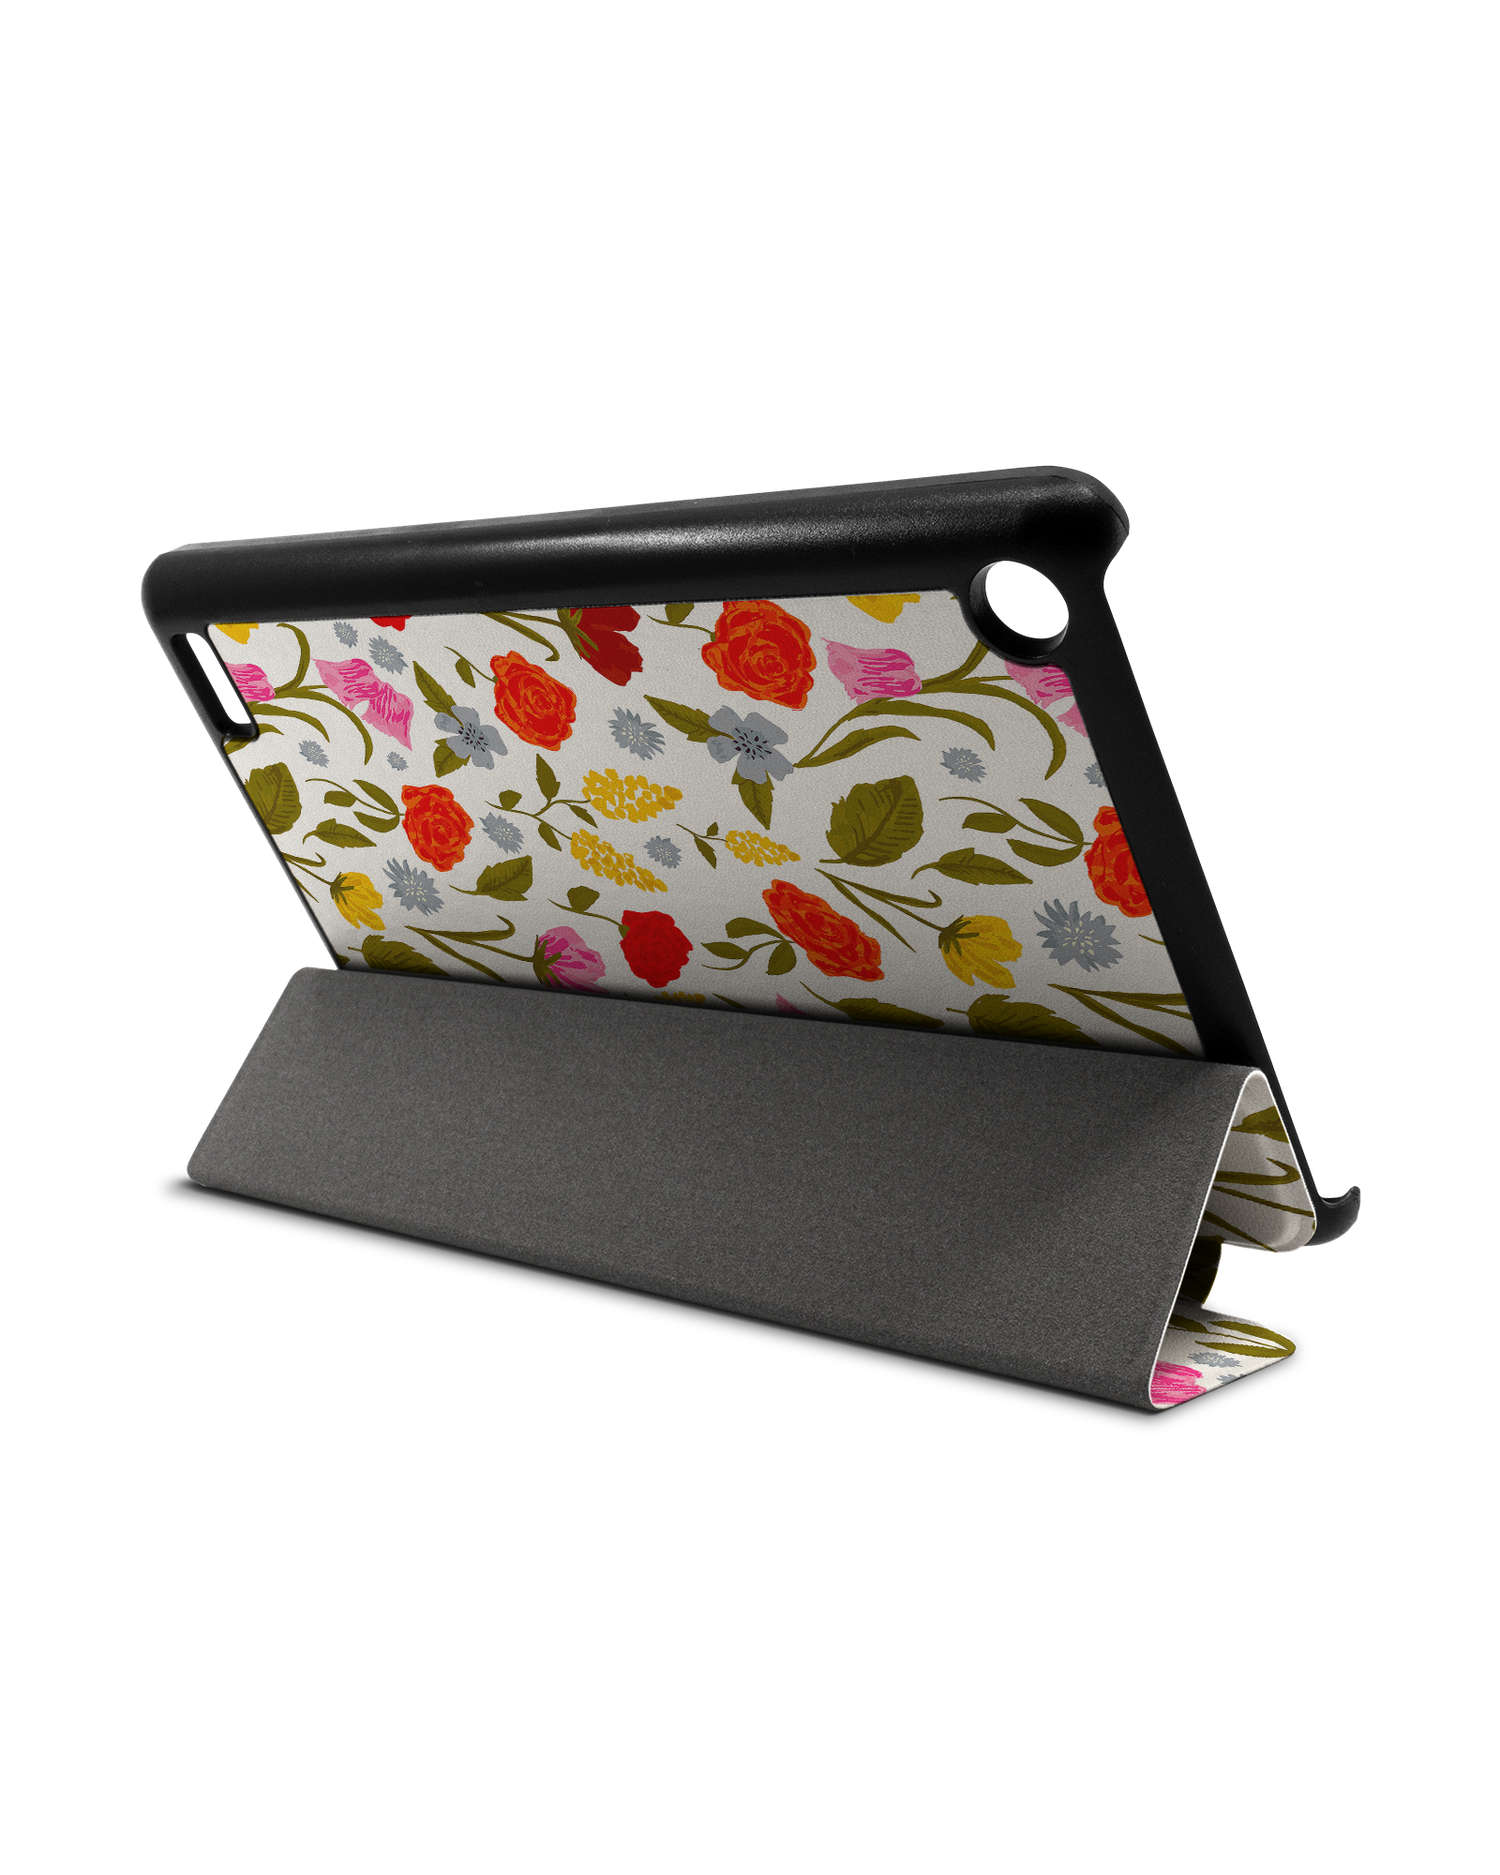 Botanical Beauties Tablet Smart Case for Amazon Fire 7: Used as Stand